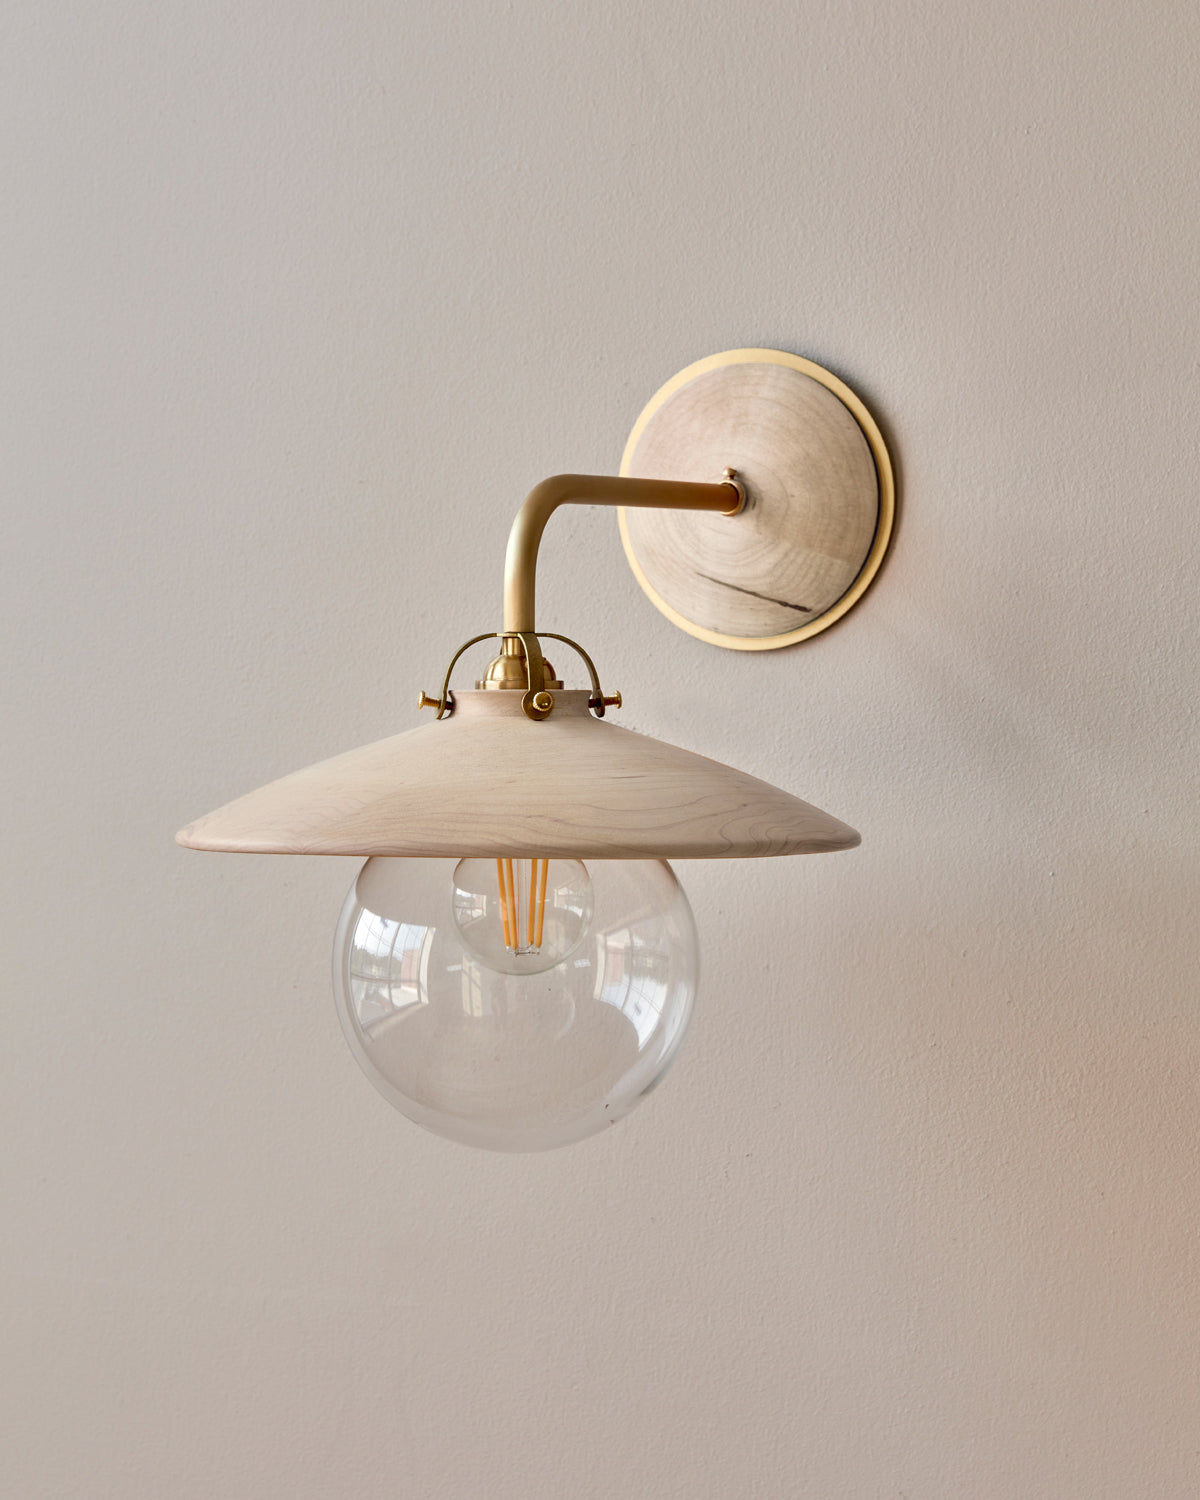 Hardwired satin brass wall sconce with decorative wooden clear maple shade and glass globe